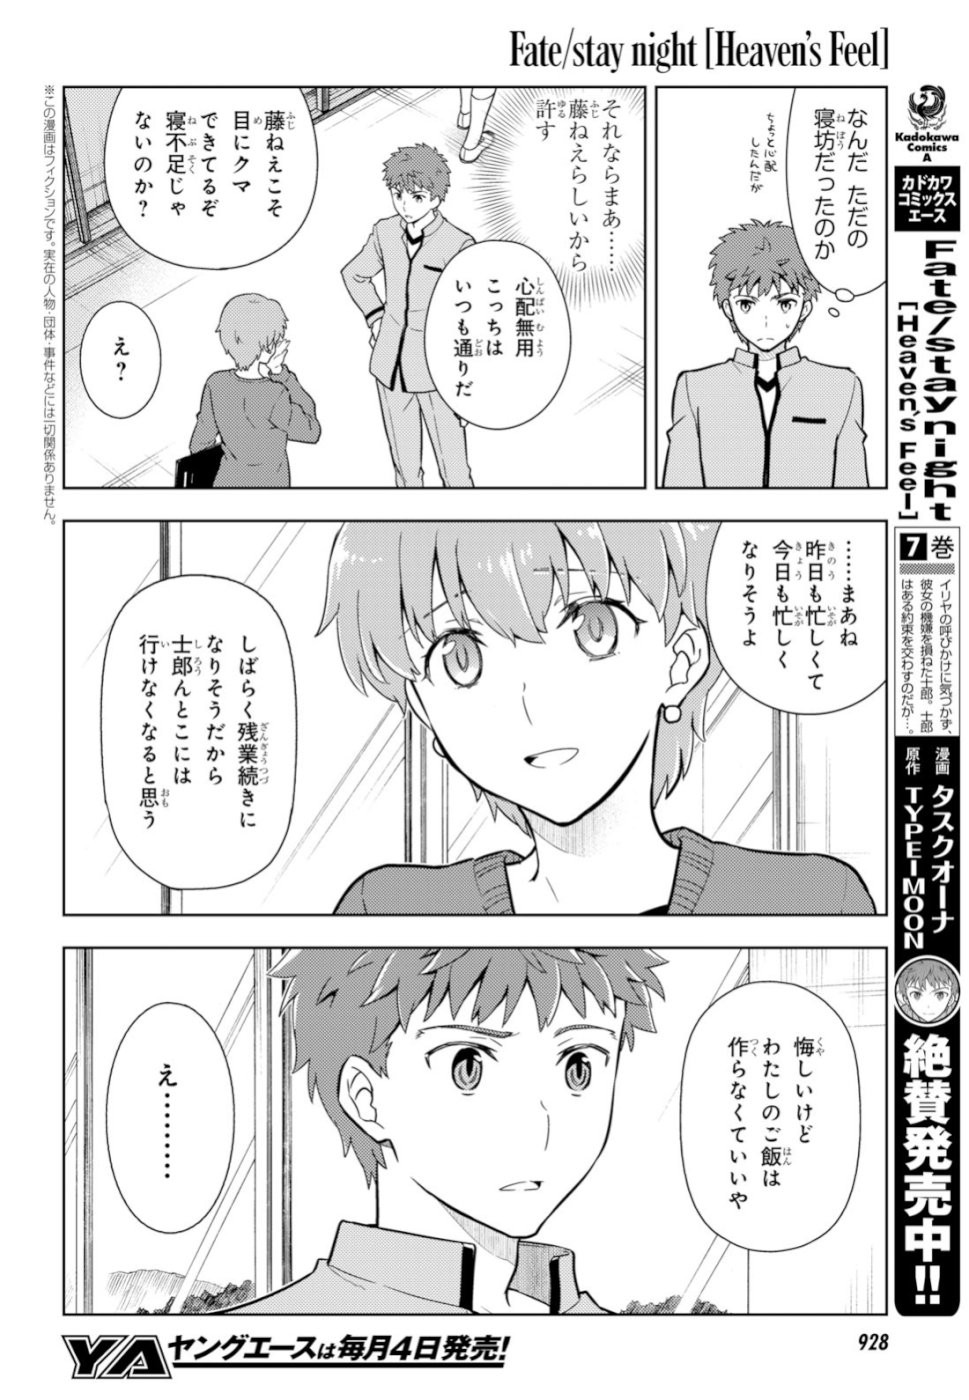 Fate/Stay night Heaven's Feel - Chapter 49 - Page 2